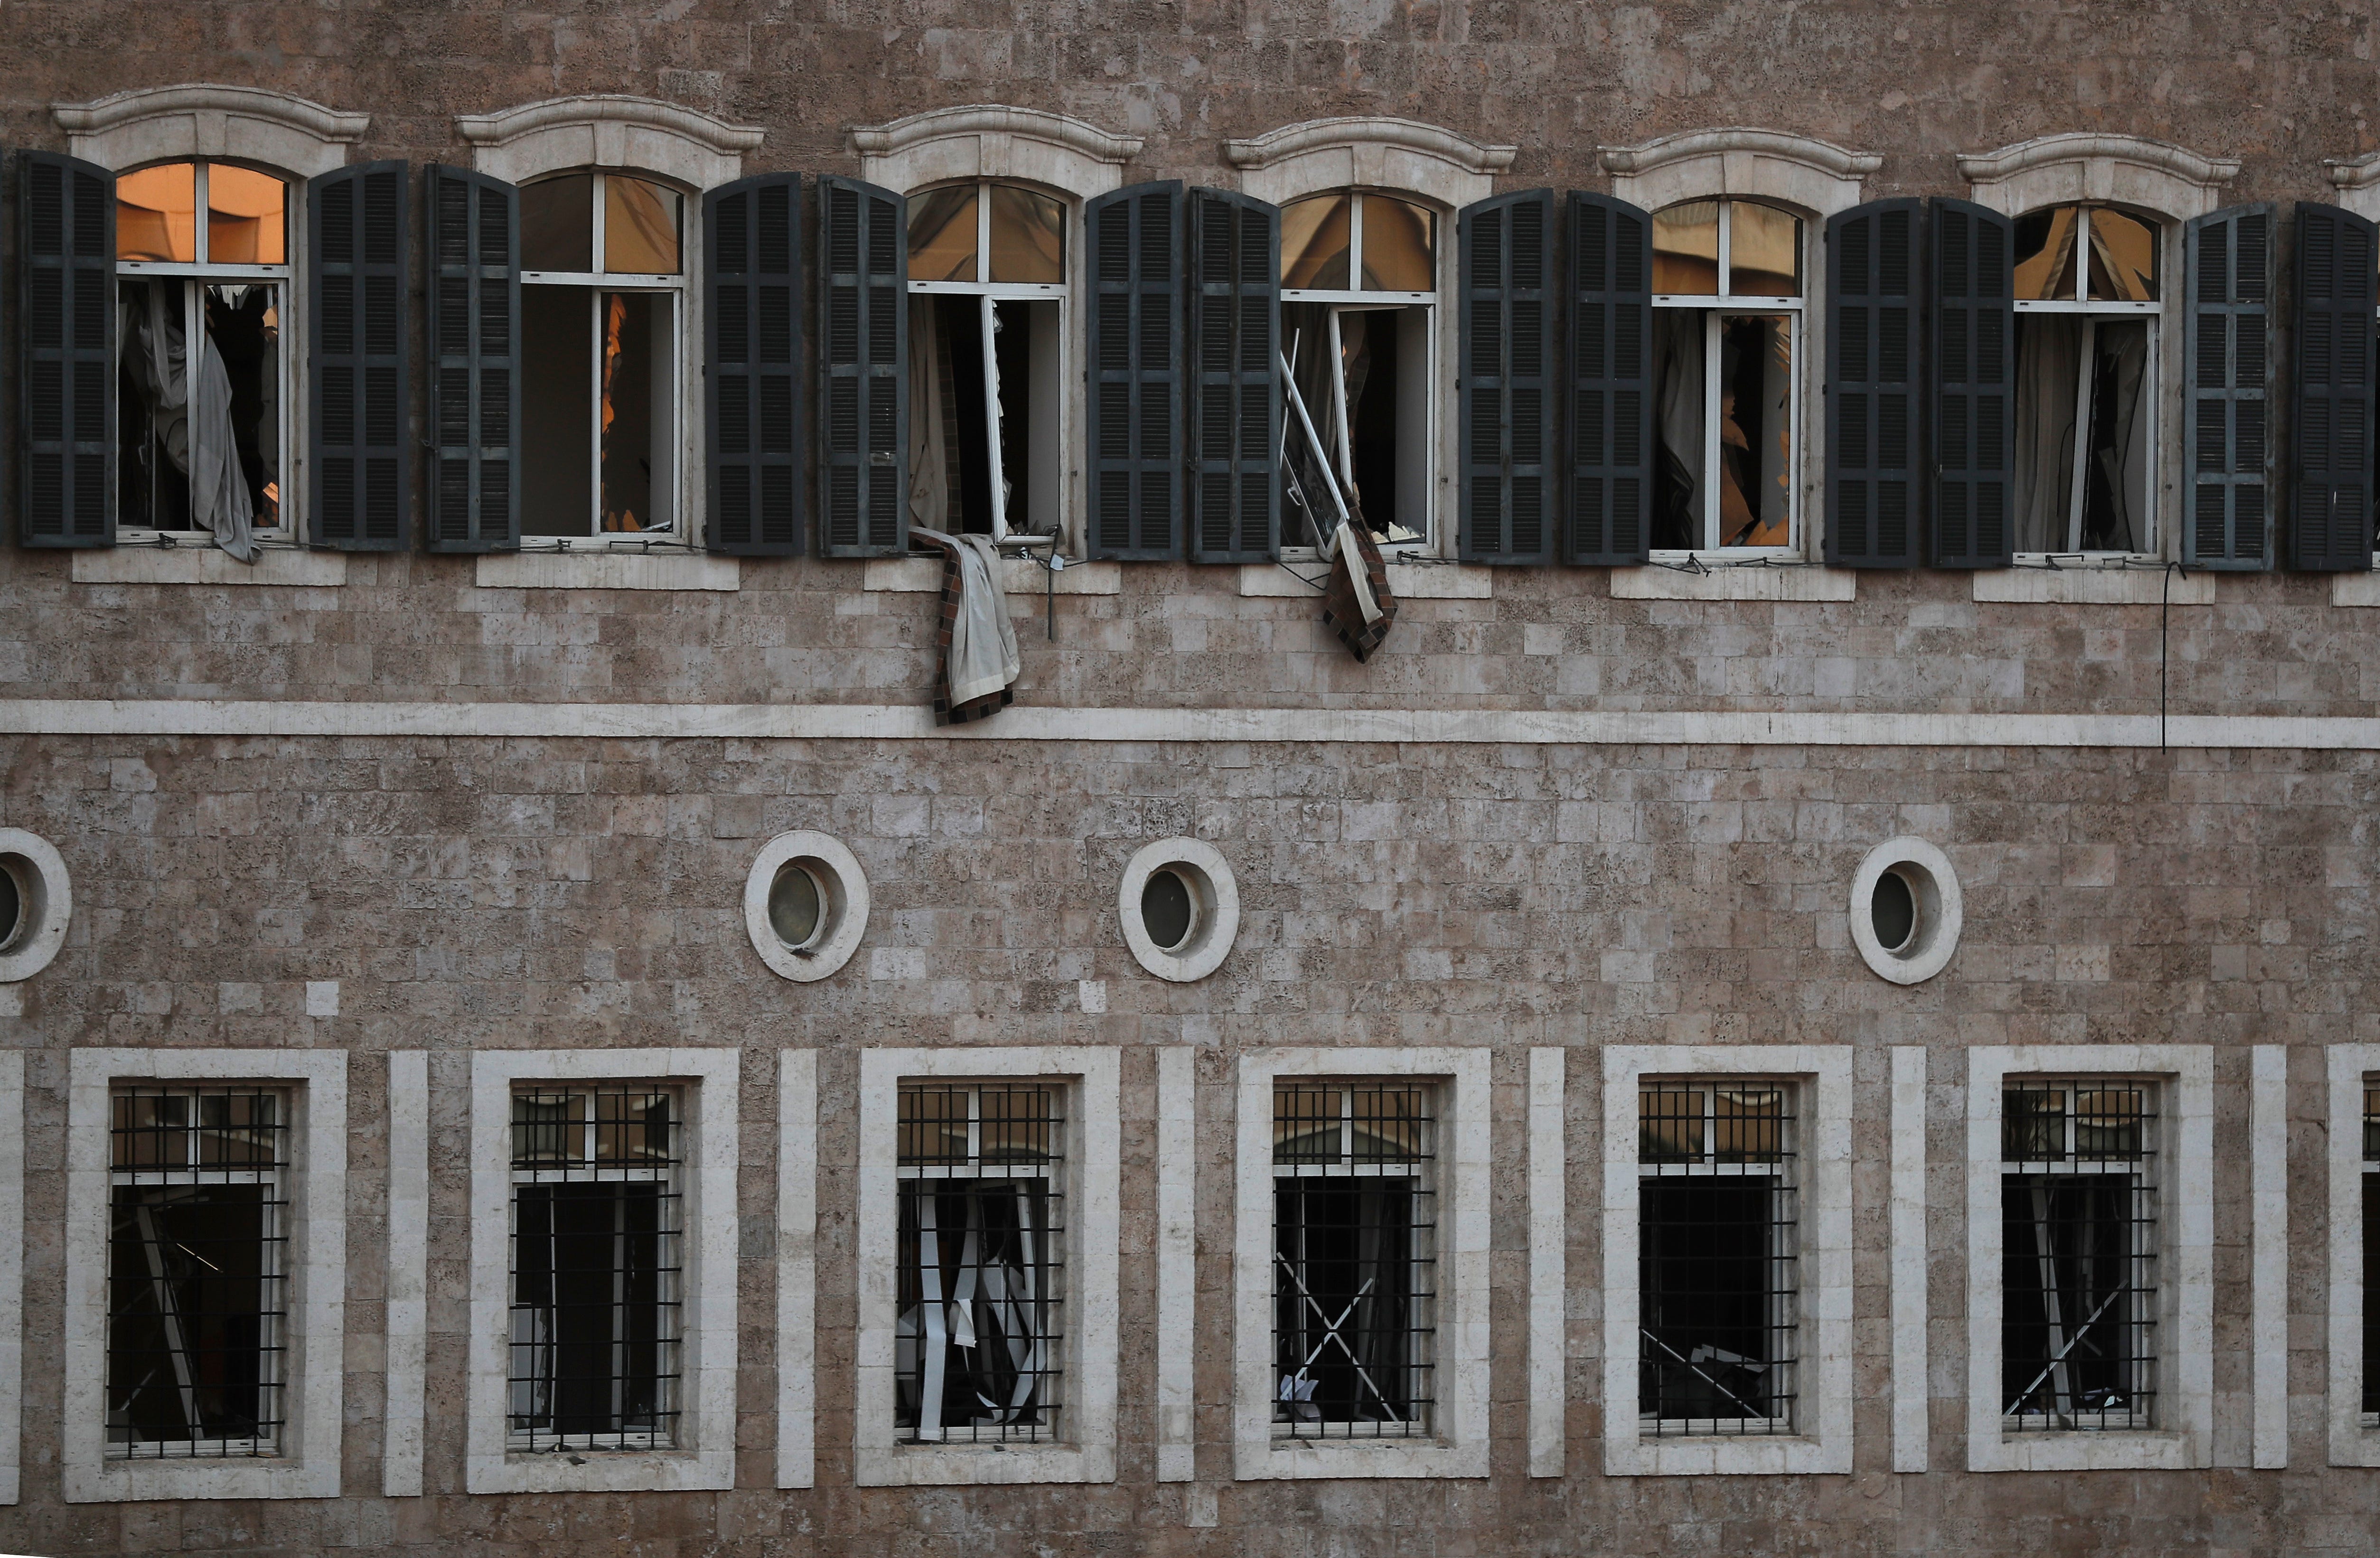 Windows of the Lebanese Government Palace are seen damaged after an explosion hit the seaport of Beirut, Lebanon, Tuesday, Aug. 4, 2020. Massive explosions rocked downtown Beirut on Tuesday, flattening much of the port, damaging buildings and blowing out windows and doors as a giant mushroom cloud rose above the capital.